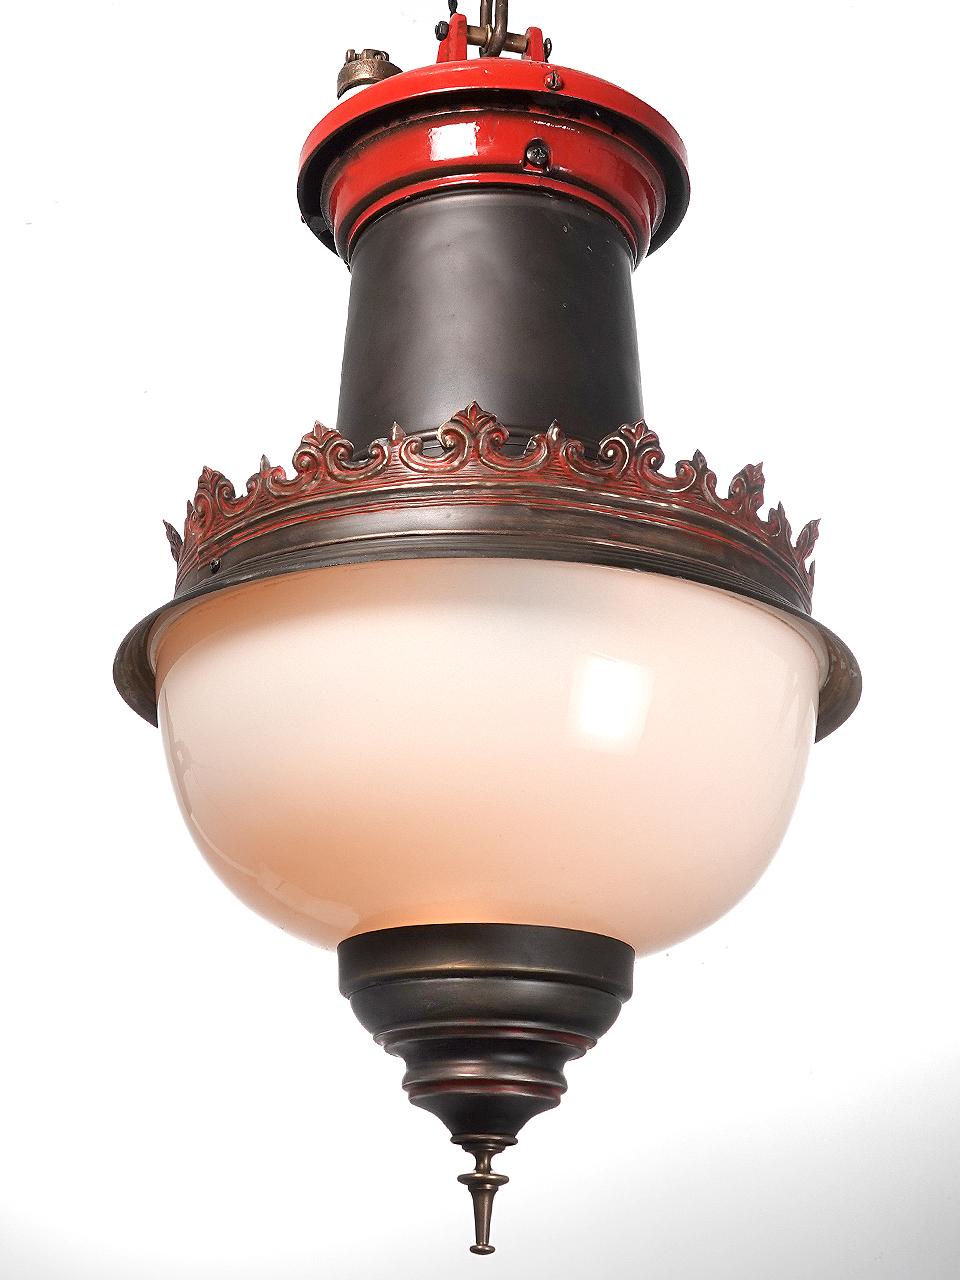 American Early Red Top Street Light For Sale